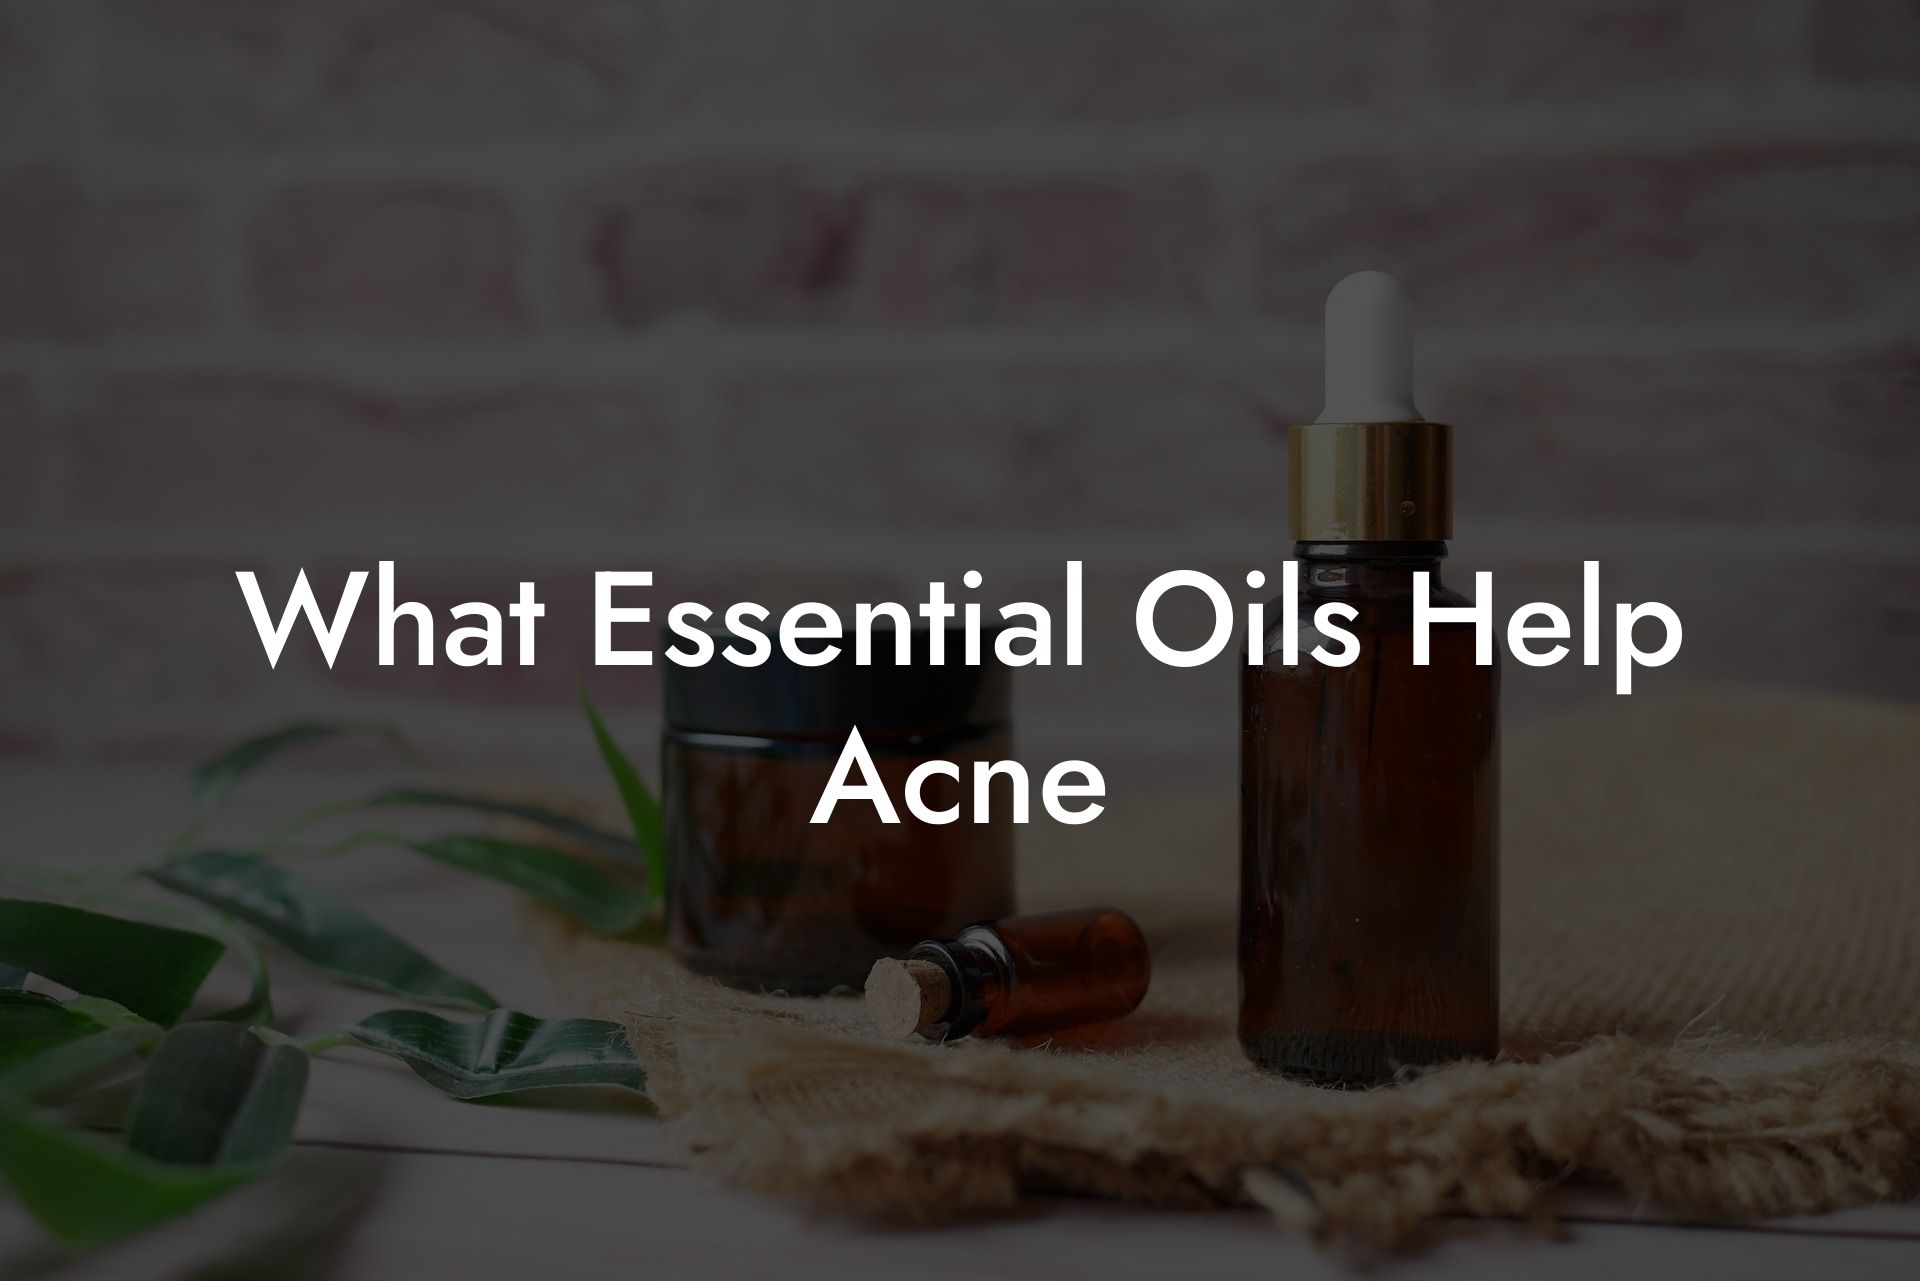 What Essential Oils Help Acne